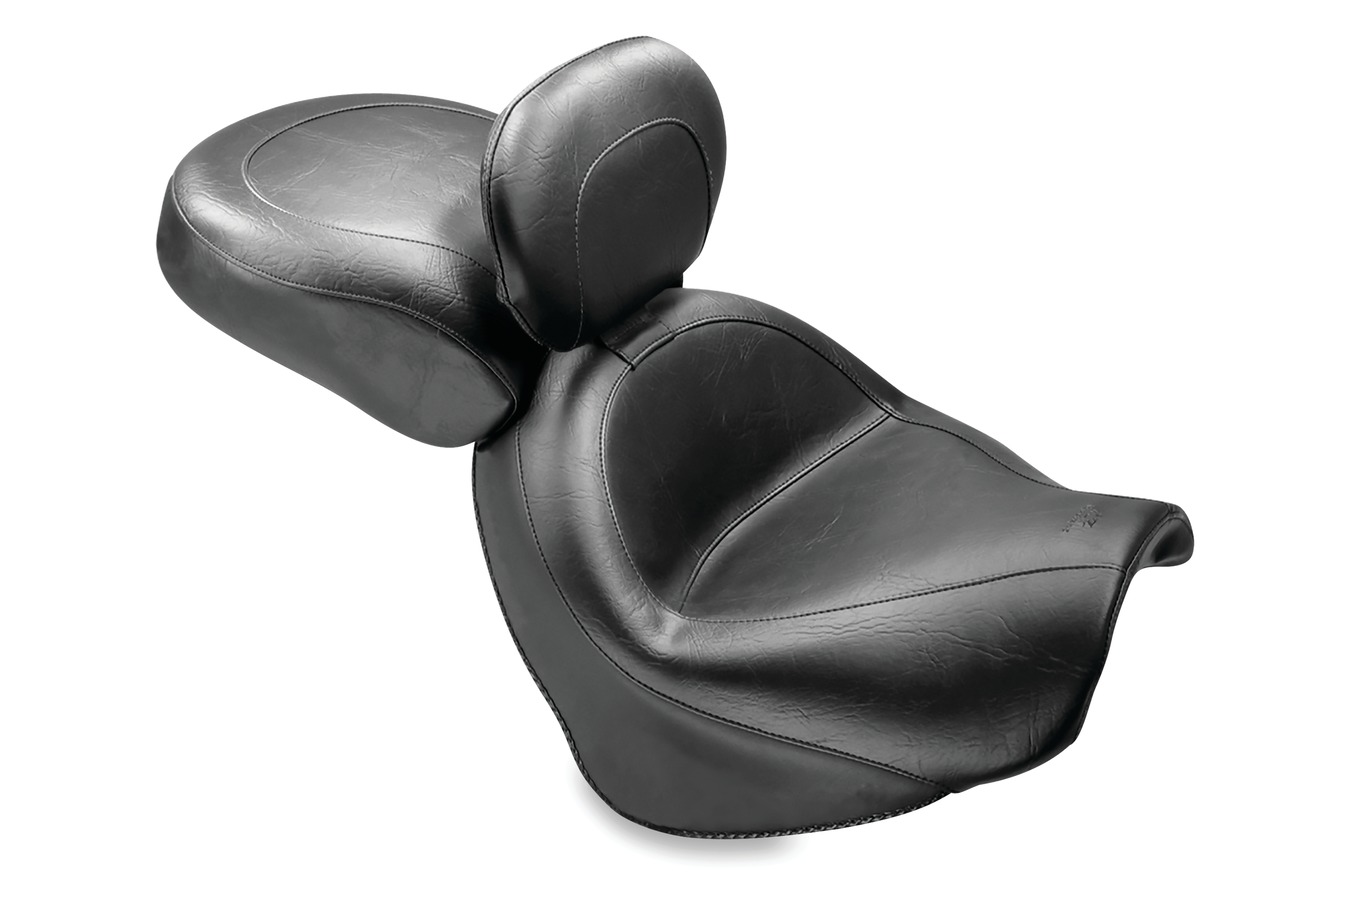 Standard Touring Two-Piece Seat with Driver Backrest for Suzuki Boulevard C50 & C50T 2009-